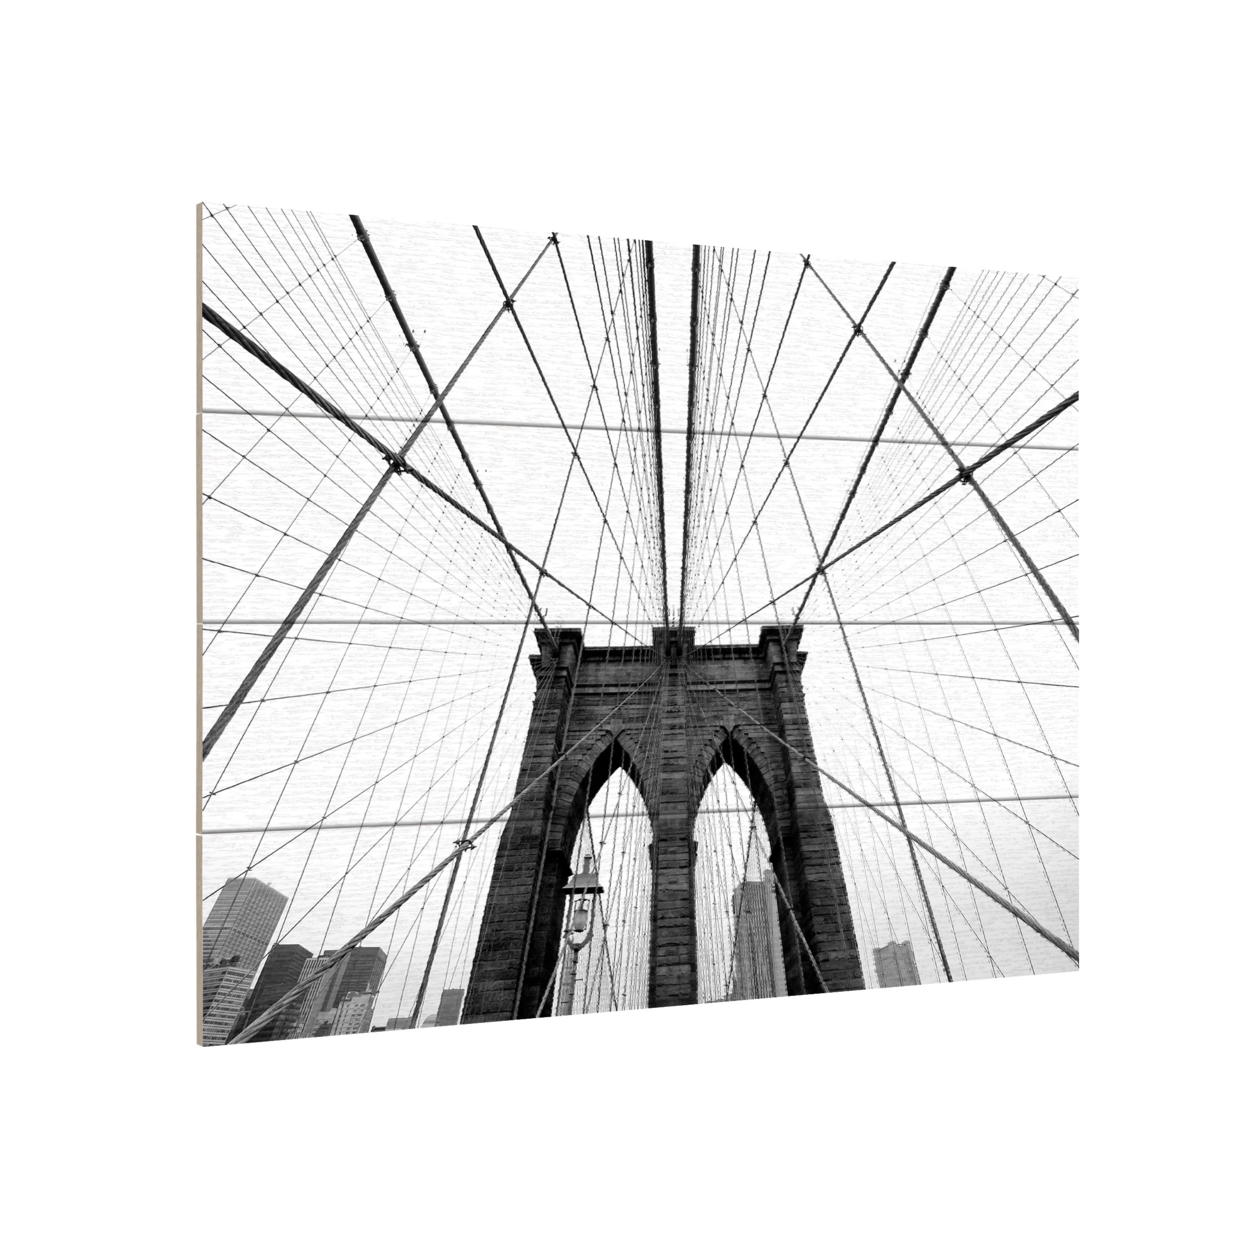 Wall Art 12 X 16 Inches Titled NYC Brooklyn Bridge Ready To Hang Printed On Wooden Planks